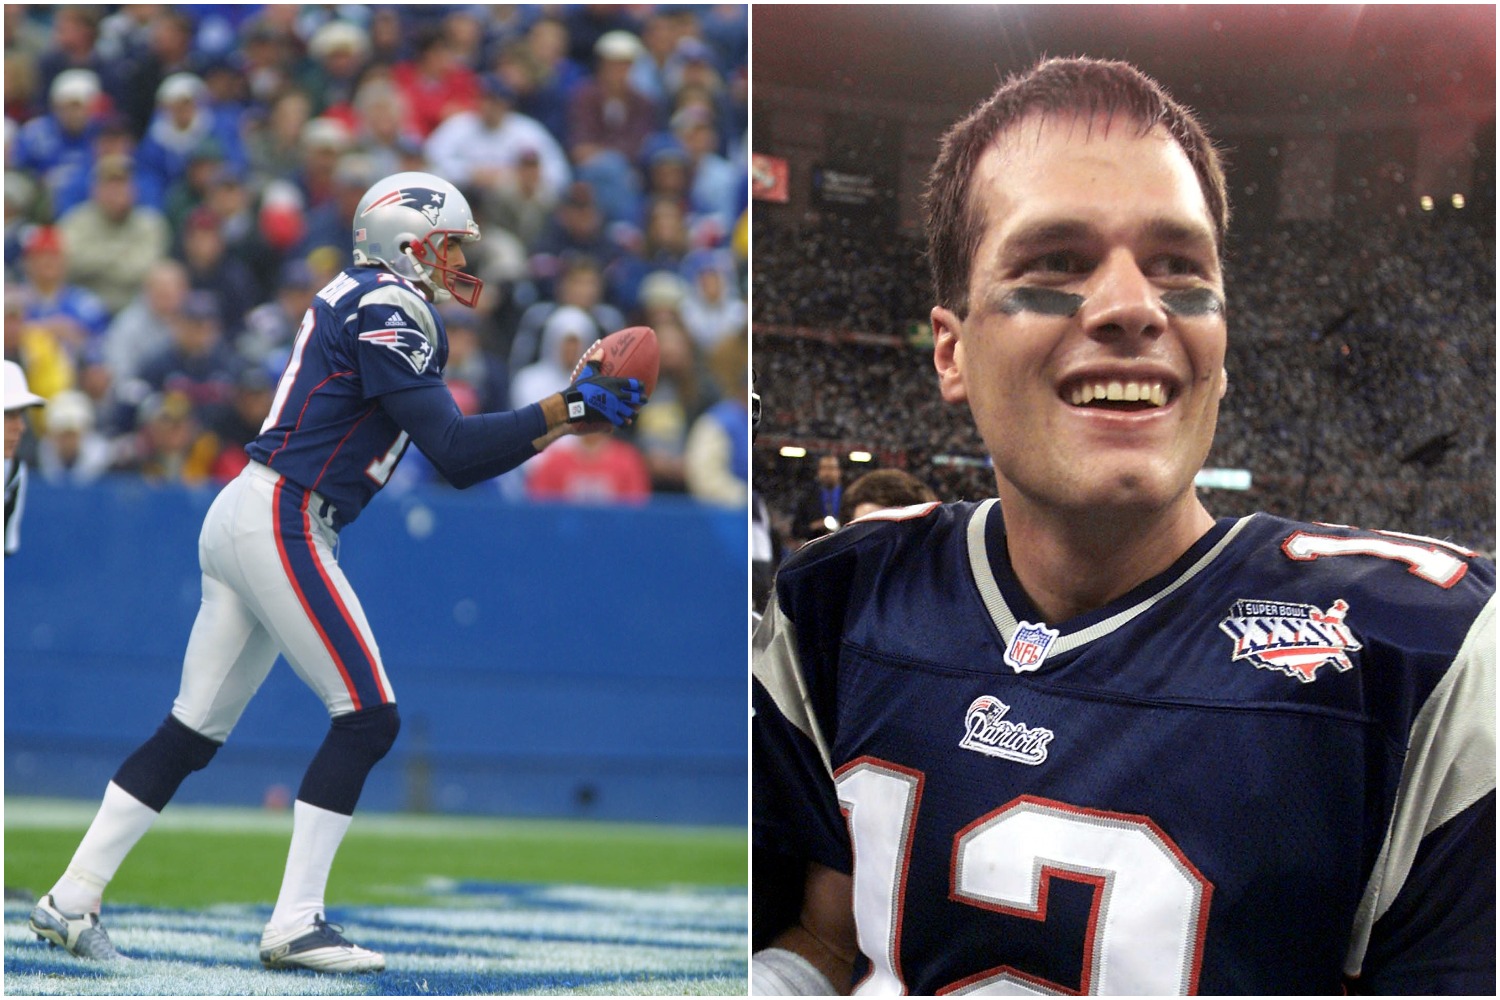 Lee Johnson delivers a punt for the Patriots as Tom Brady smiles after winning Super Bowl 36.